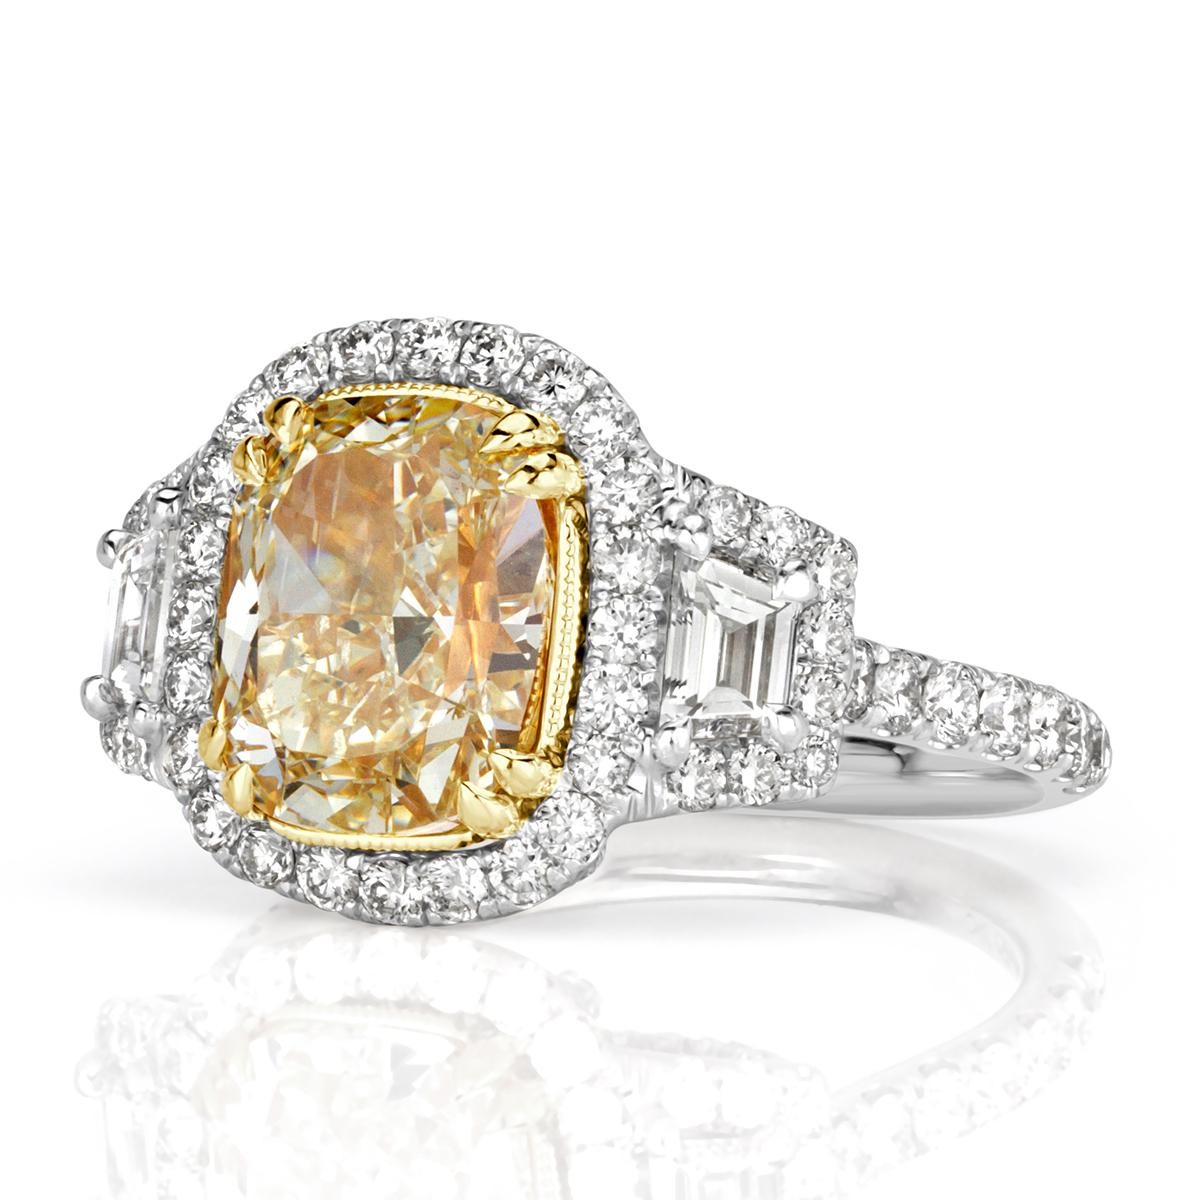 This gorgeous piece features a one-of-kind 3.33ct cushion cut center diamond, GIA certified at fancy light yellow in color, VS2 in clarity. It radiates a vibrant yellow hue and has amazing measurements of 9.54 x 7.60mm. It is flanked by two